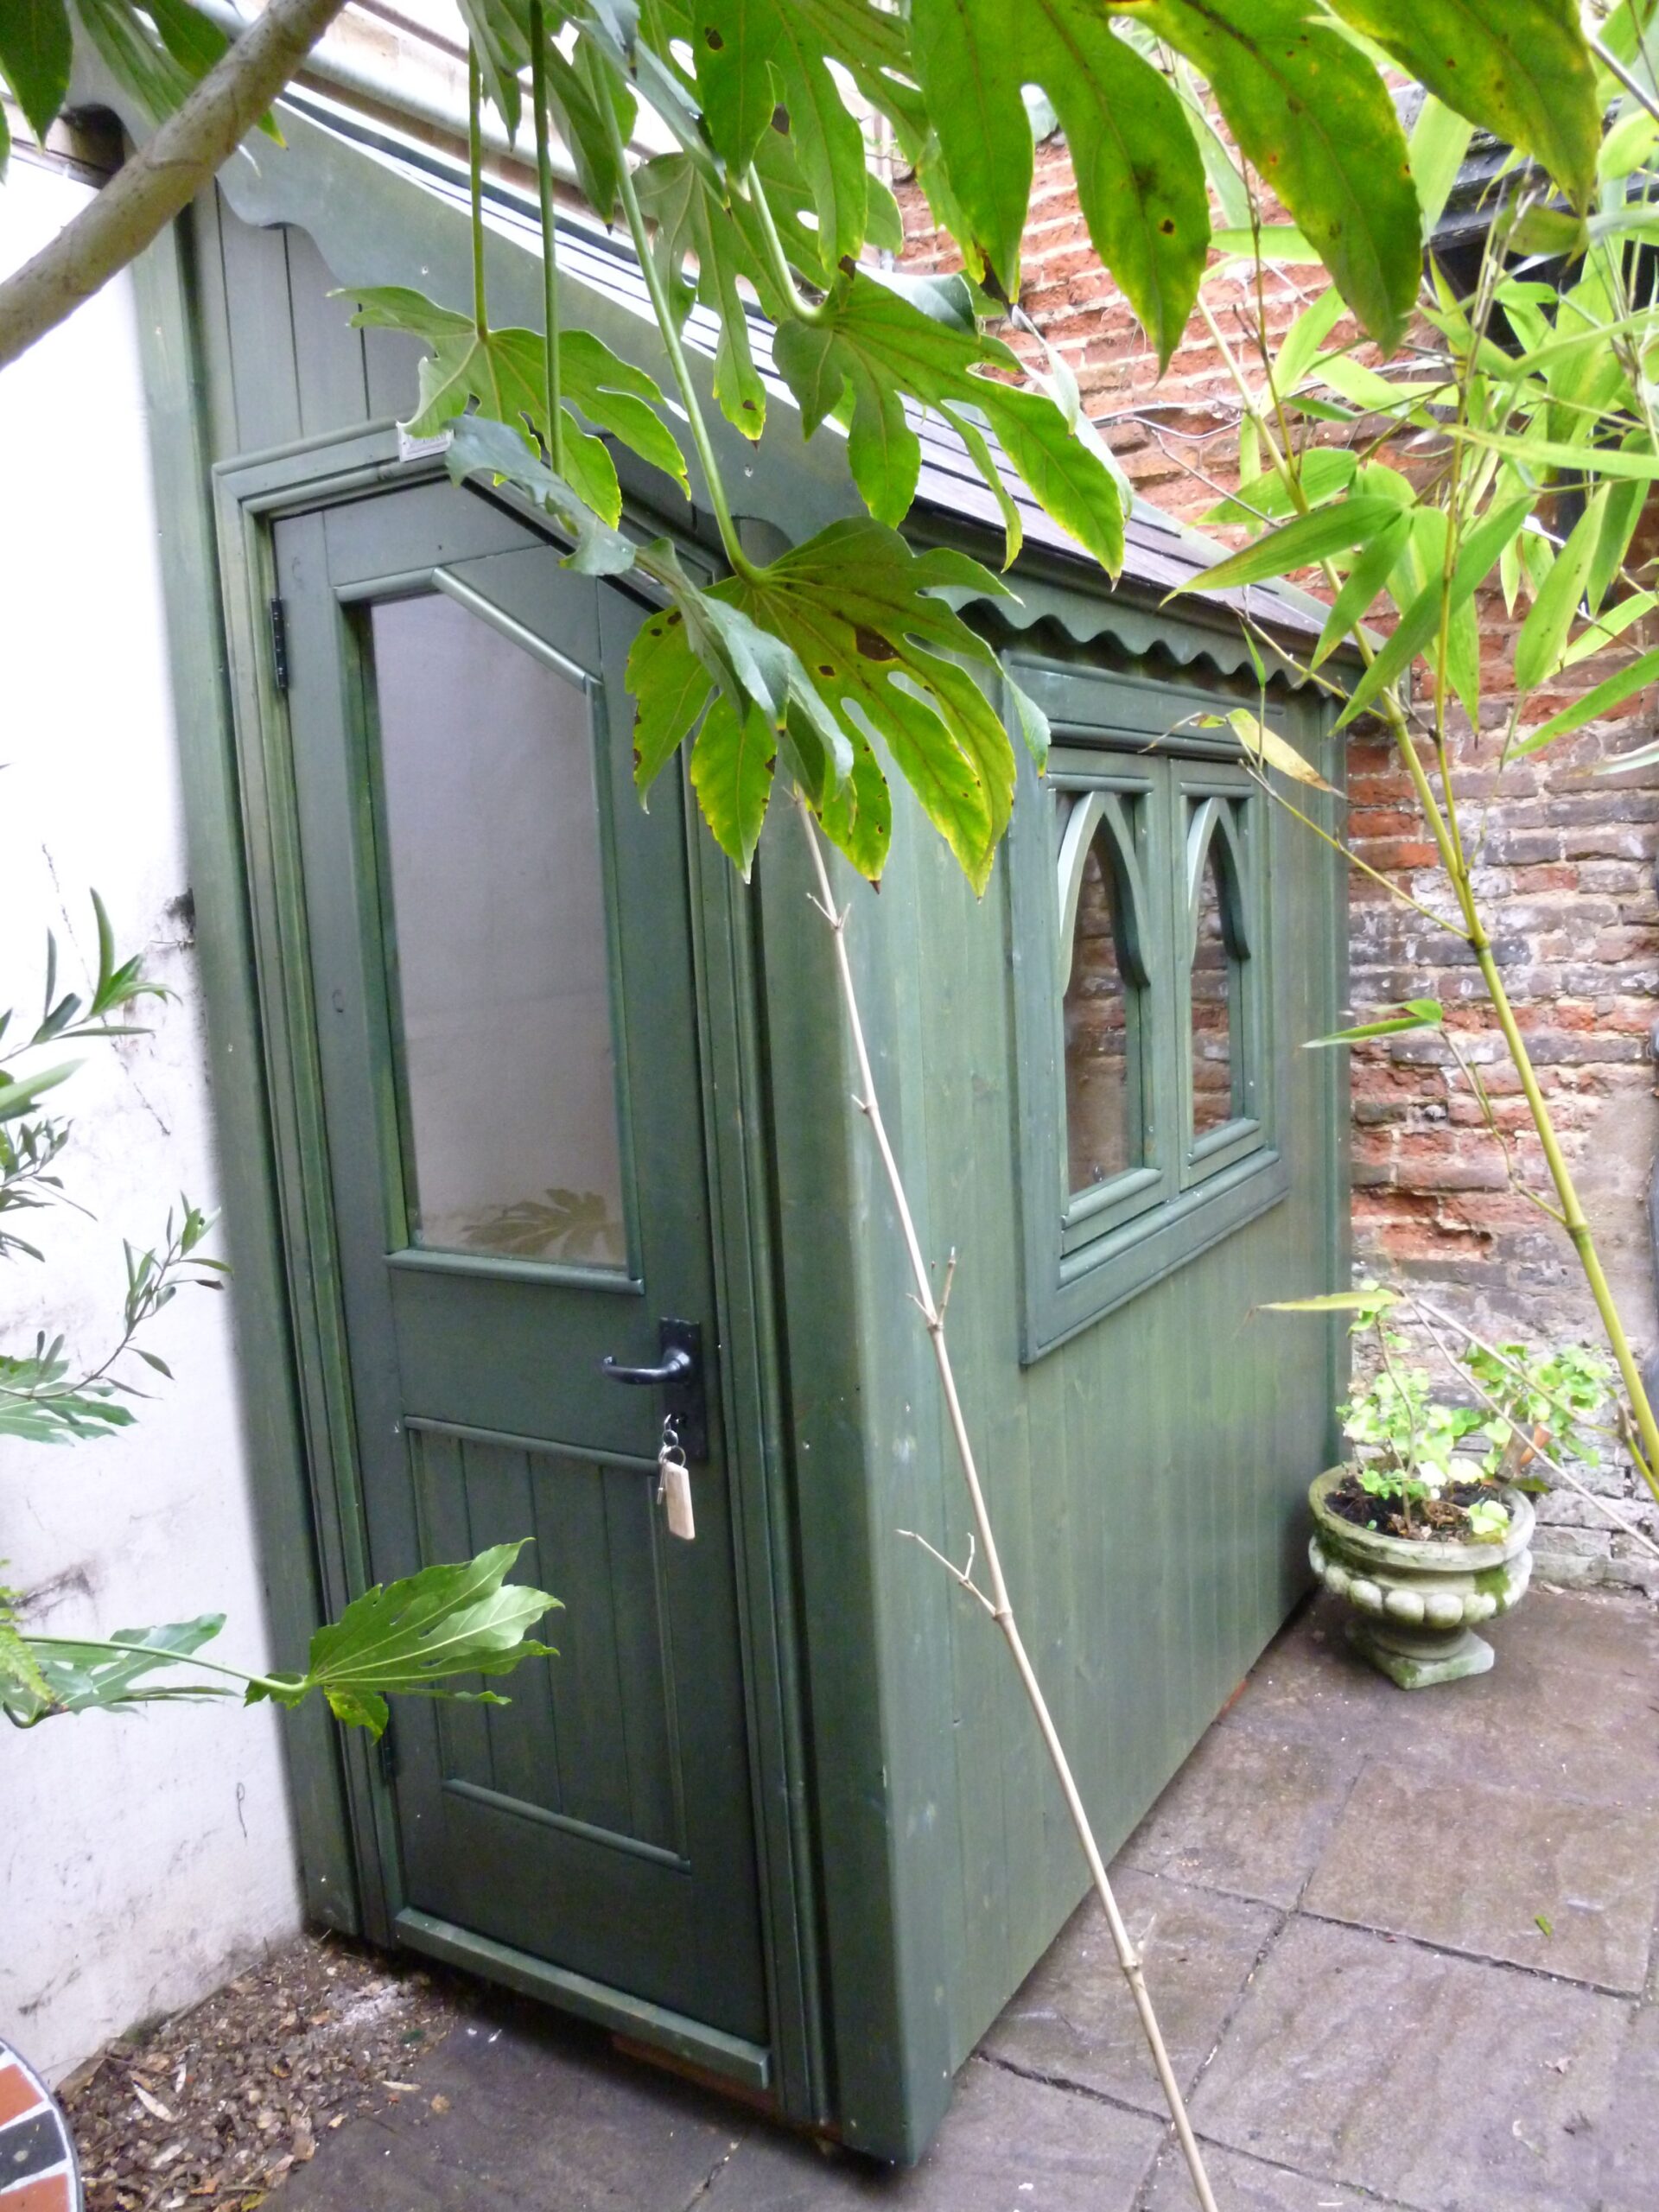 The Appeal of a Petite Garden Shed